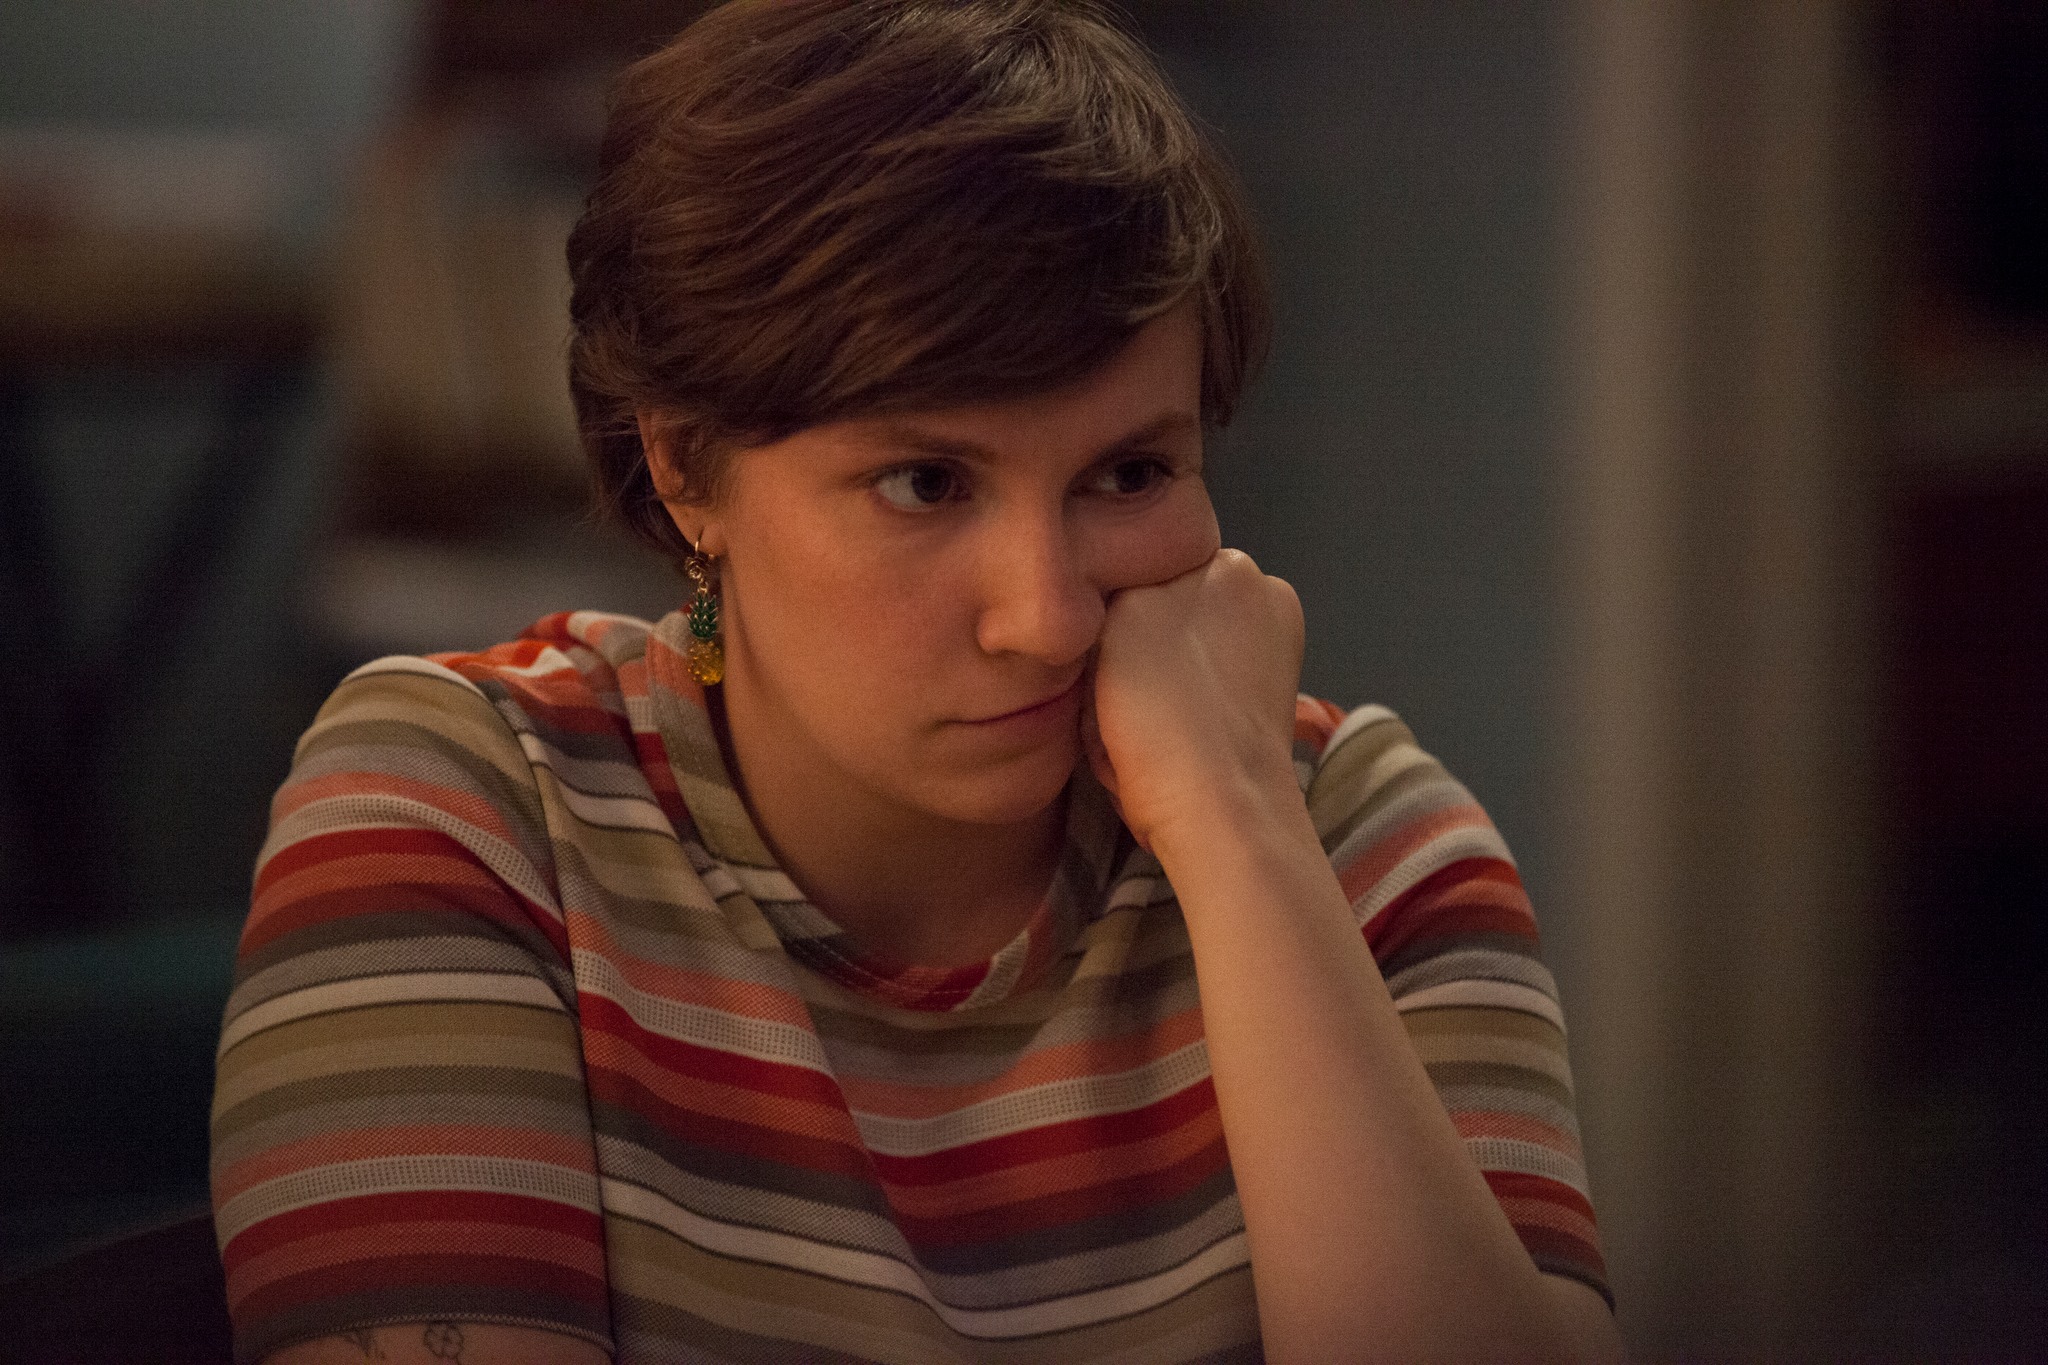 Lena Dunham might quit acting after Girls